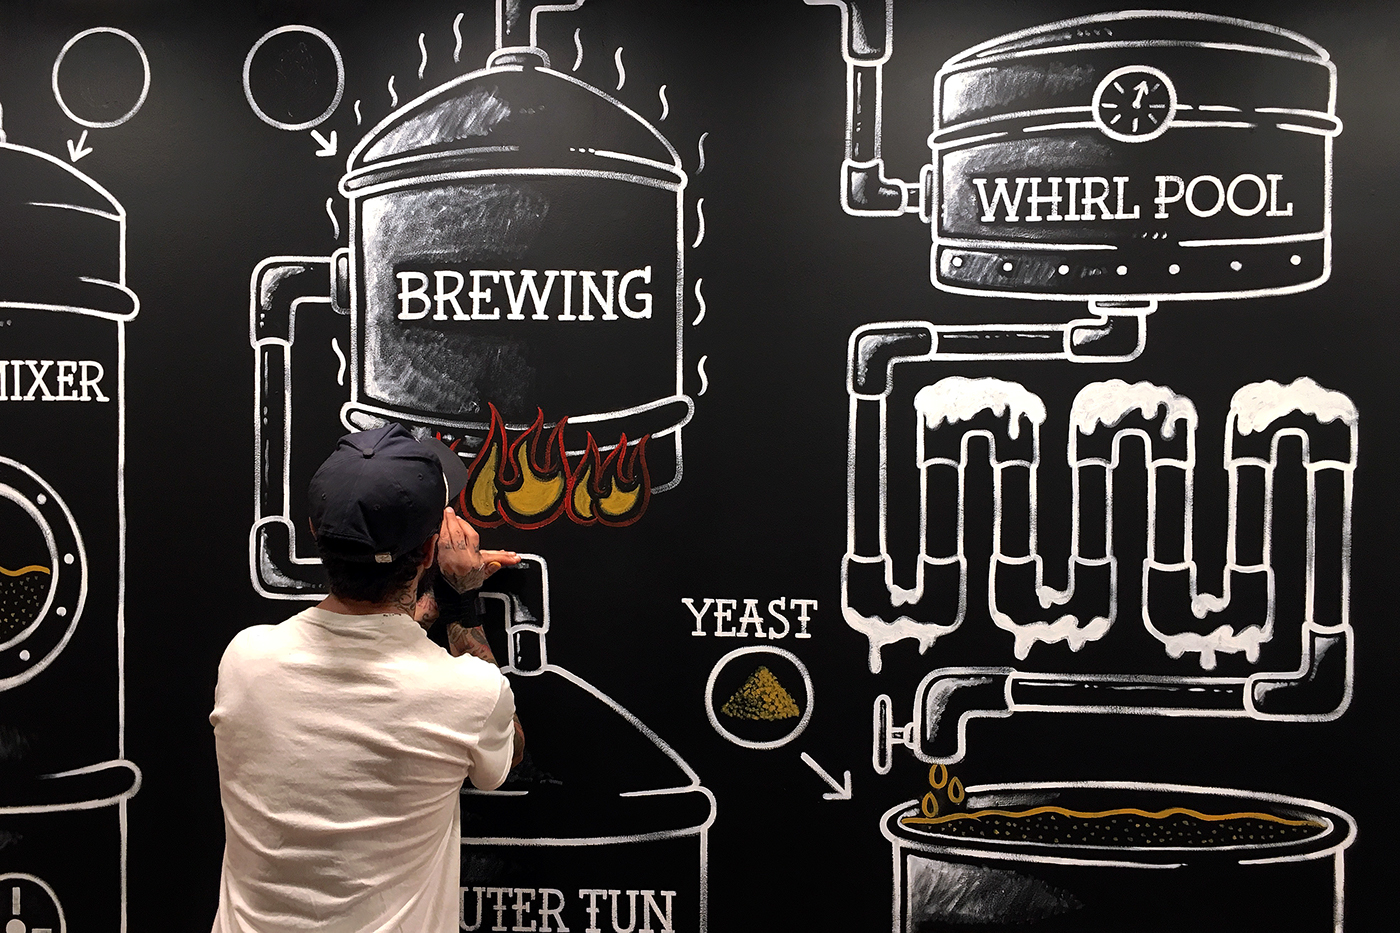 Hand Painted Mural infographic brewing process beer Chalkboard